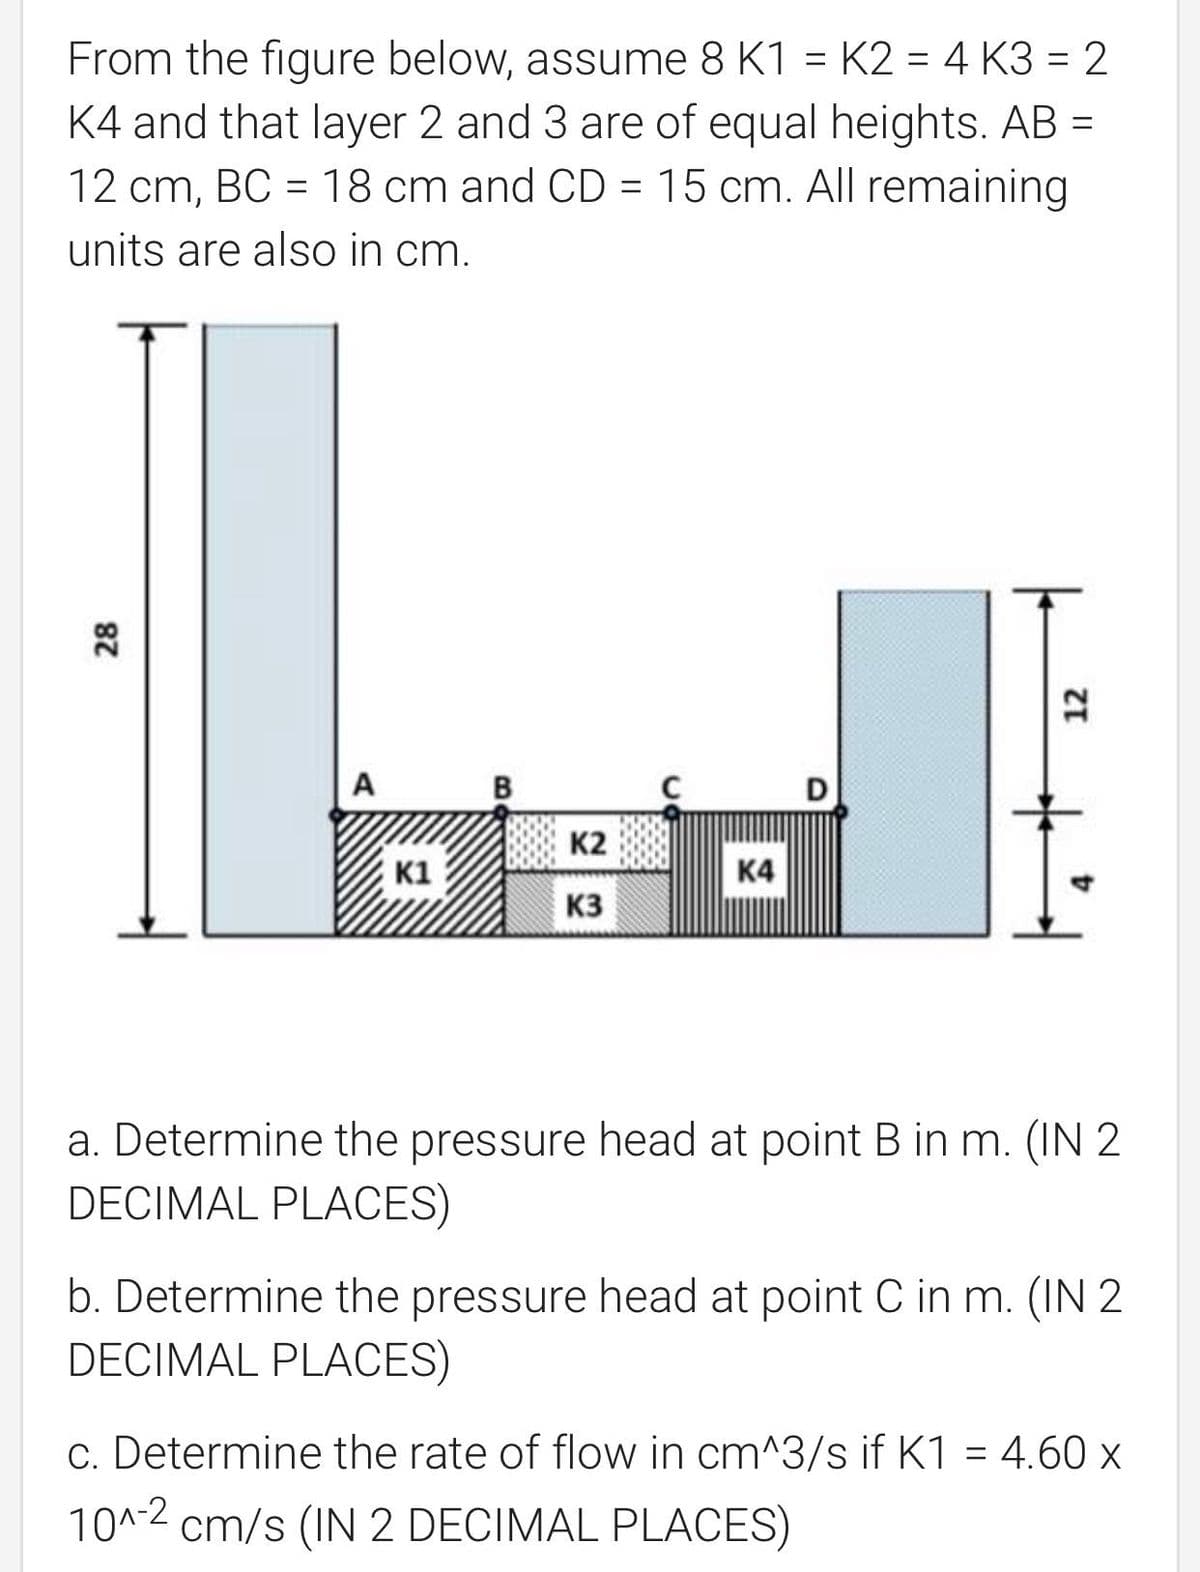 From the figure below, assume 8 K1 = K2 = 4 K3 = 2
K4 and that layer 2 and 3 are of equal heights. AB =
12 cm, BC = 18 cm and CD = 15 cm. All remaining
units are also in cm.
A
B
D
K2
K1
K4
K3
a. Determine the pressure head at point B in m. (IN 2
DECIMAL PLACES)
b. Determine the pressure head at point C in m. (IN 2
DECIMAL PLACES)
c. Determine the rate of flow in cm^3/s if K1 = 4.60 x
10^-2 cm/s (IN 2 DECIMAL PLACES)
28
12
